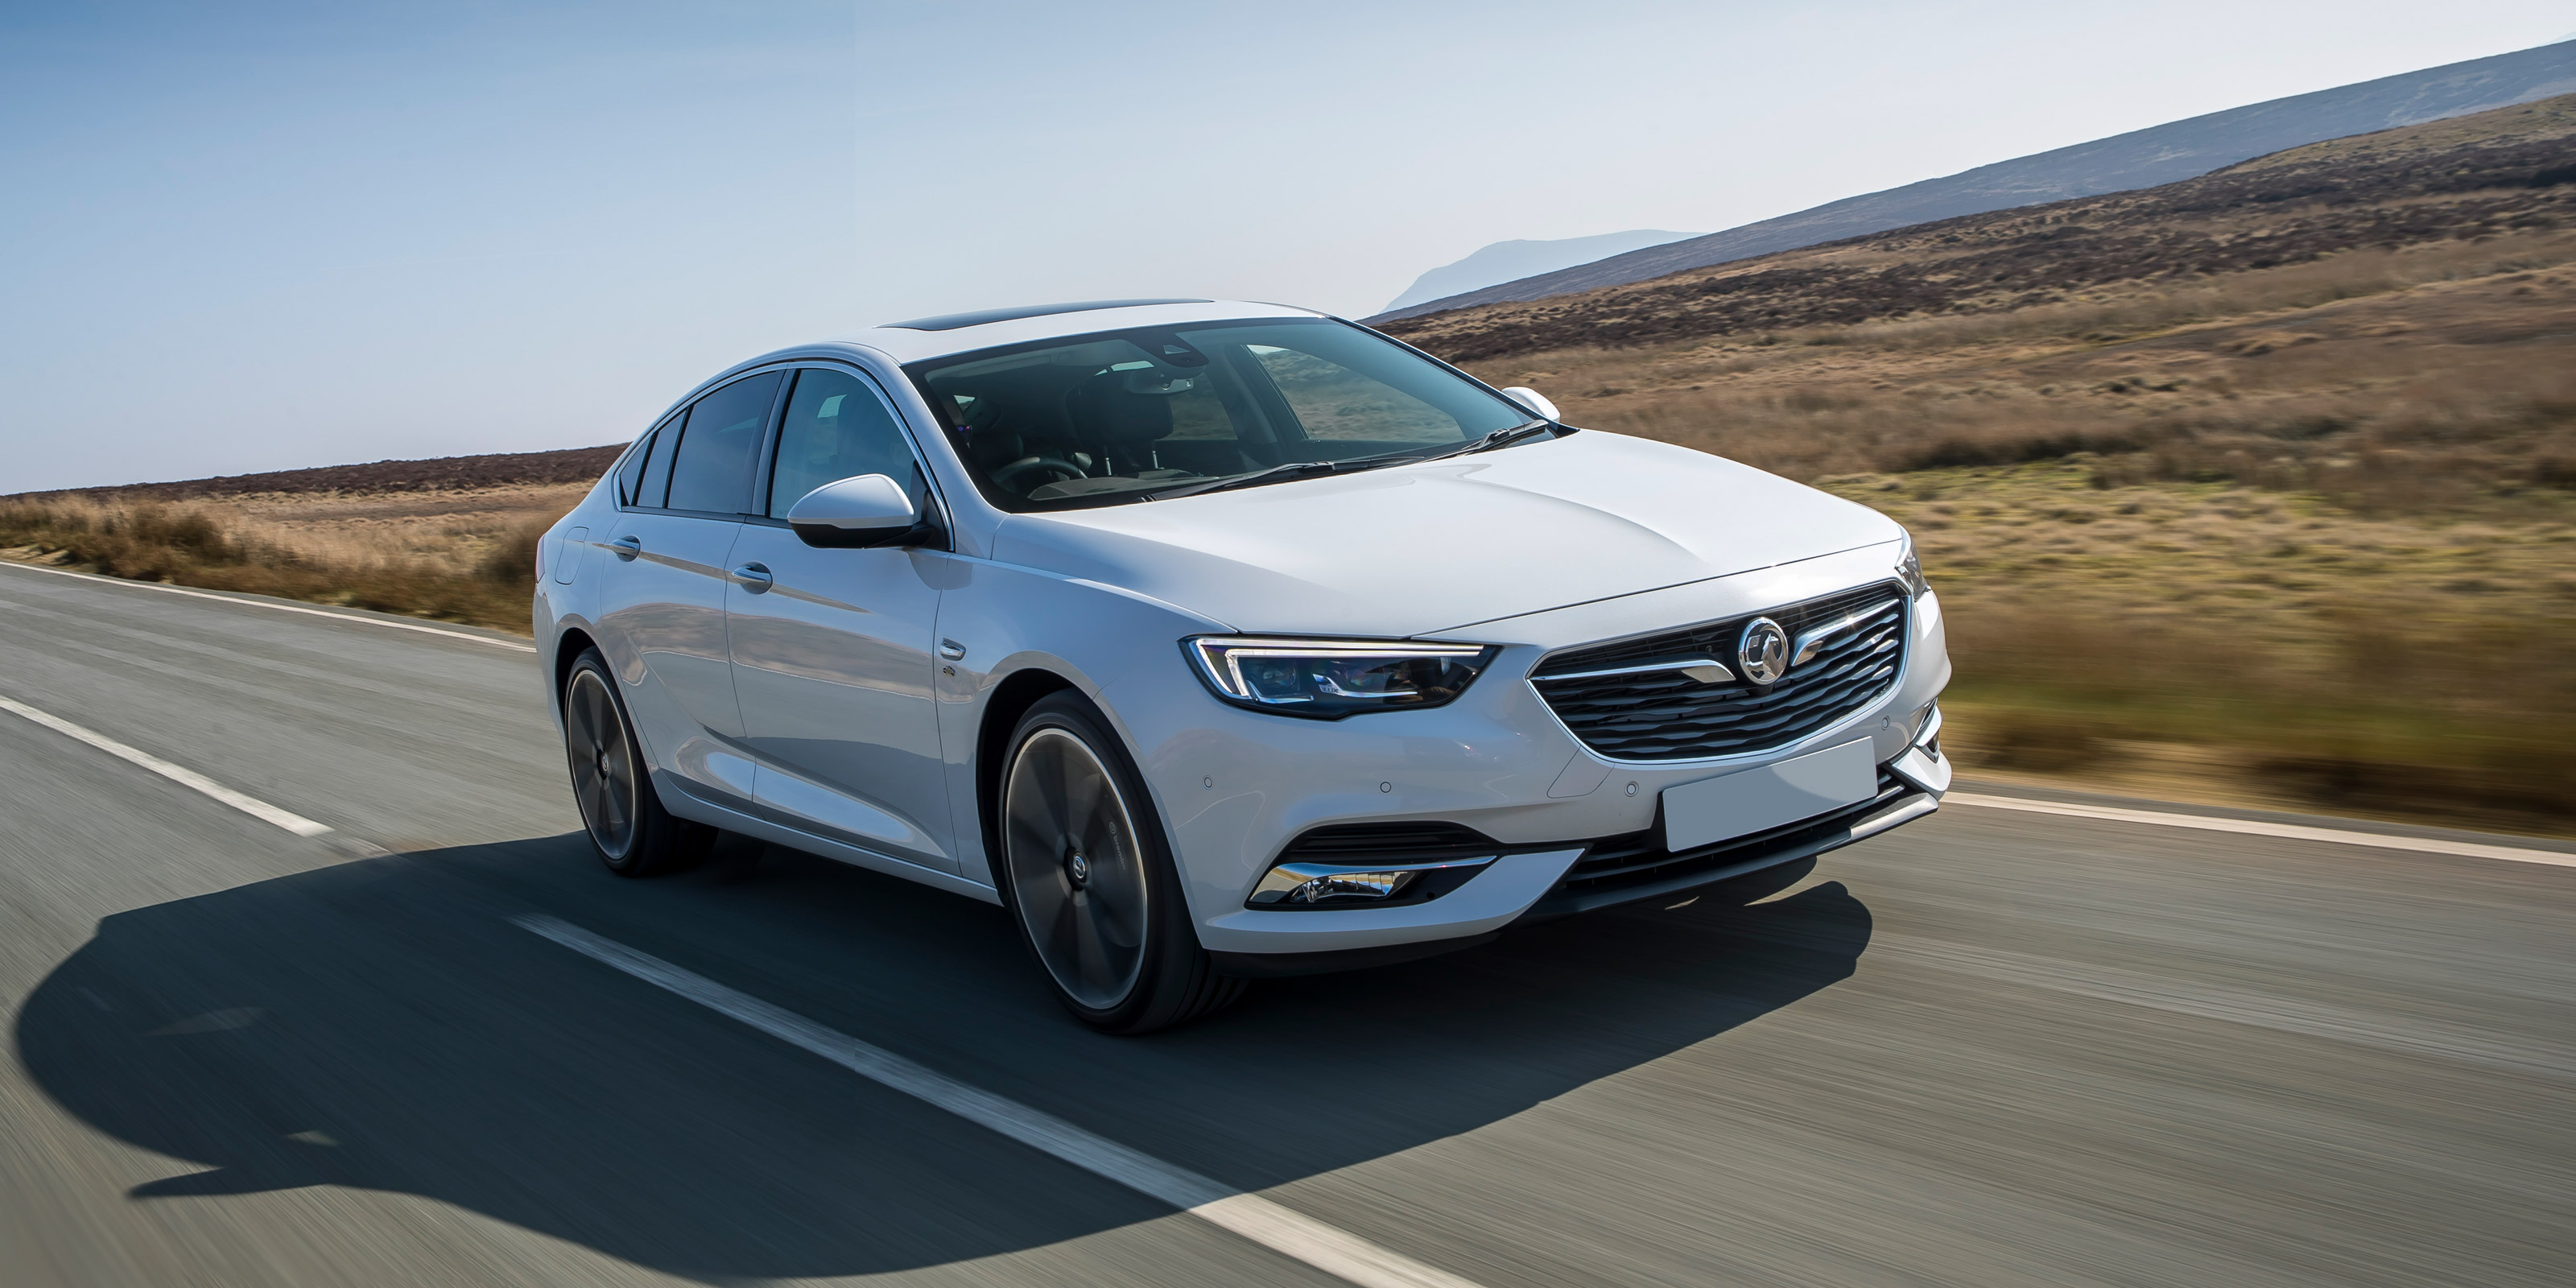 Opel Insignia Grand Sport dimensions, boot space and similars